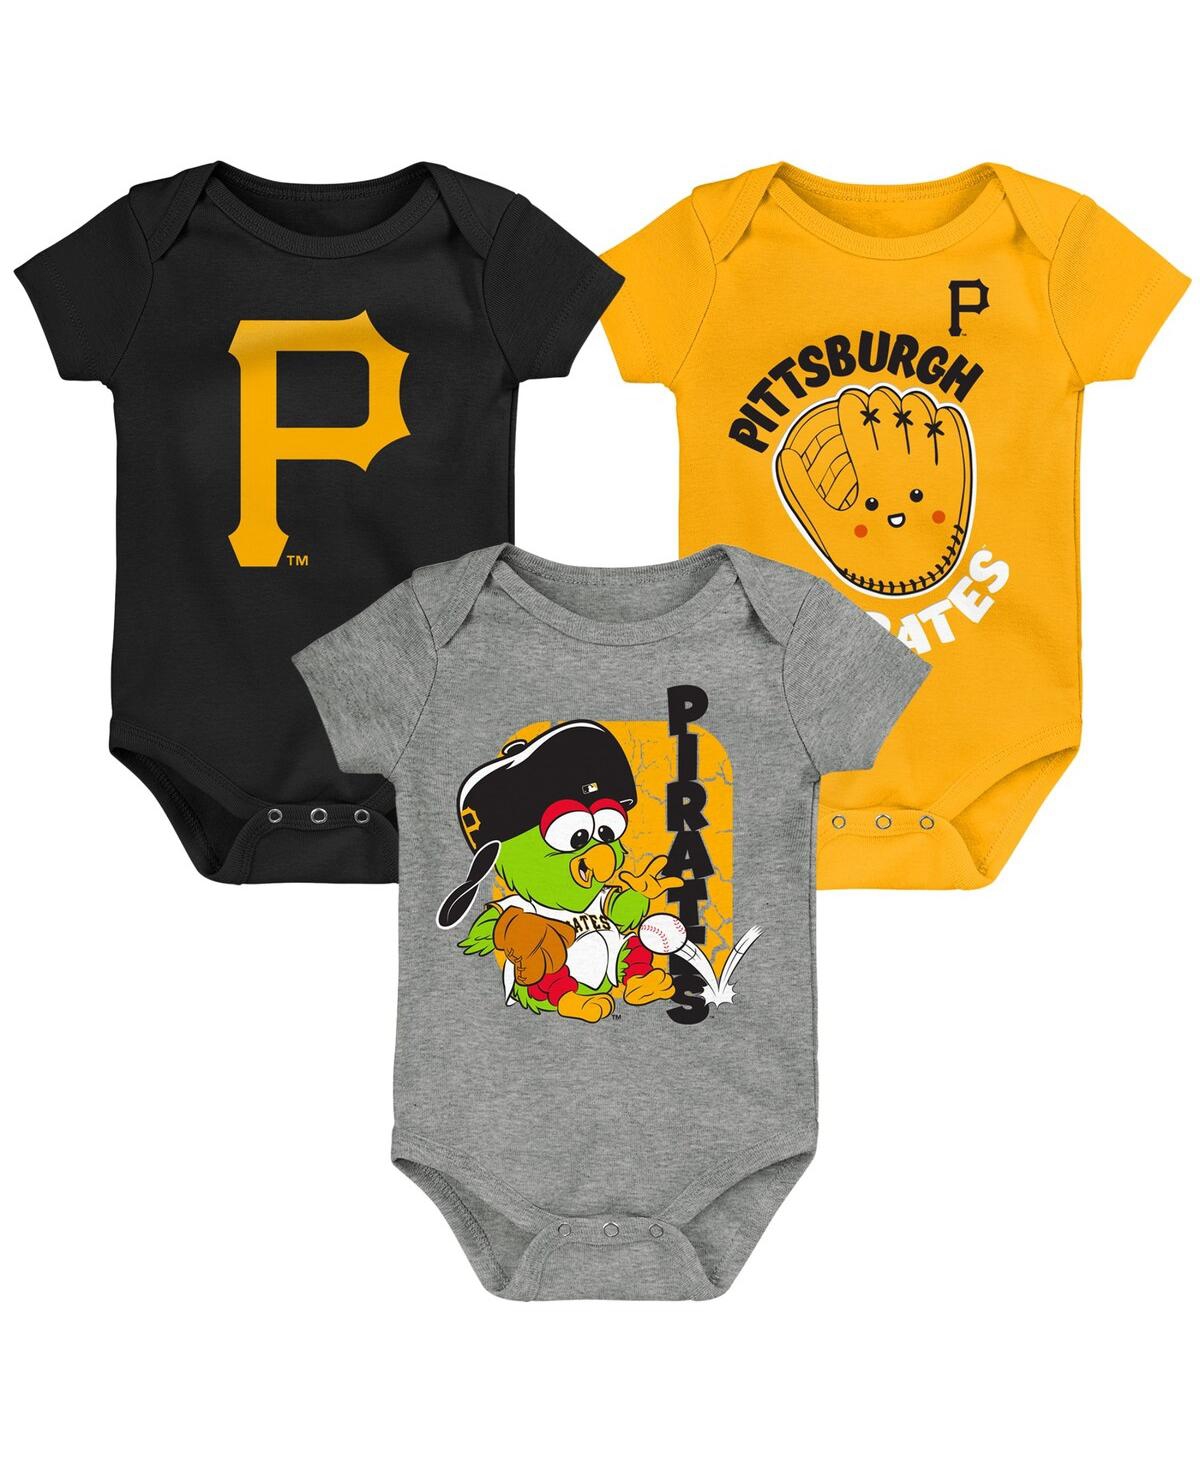 OUTERSTUFF BABY BOYS AND GIRLS BLACK, GOLD, GRAY PITTSBURGH PIRATES CHANGE UP 3-PACK BODYSUIT SET